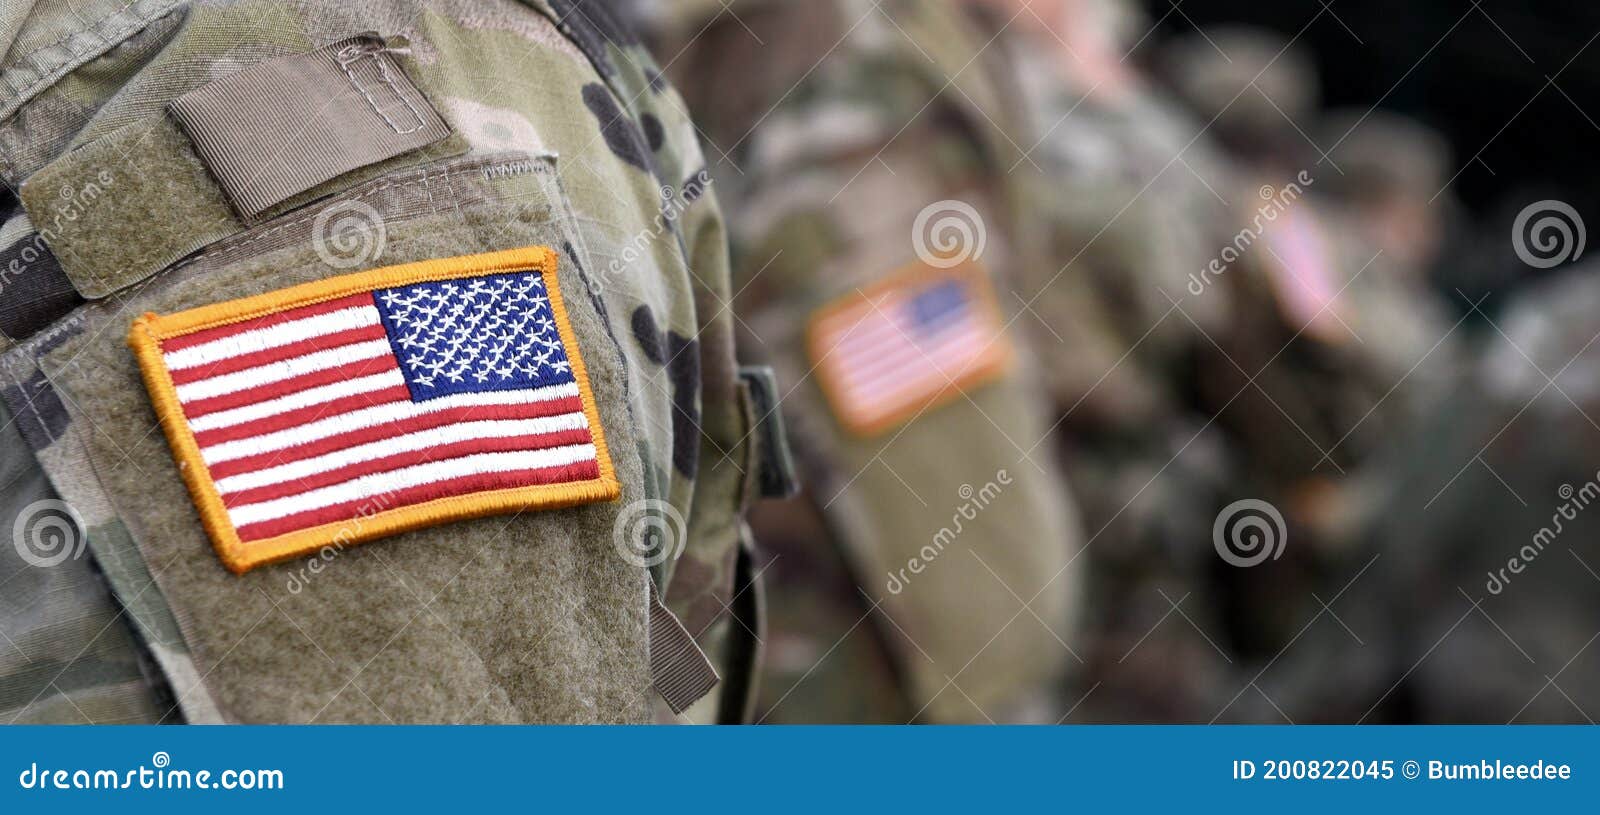 veterans day. us soldier. us army. the united states armed forces. american military